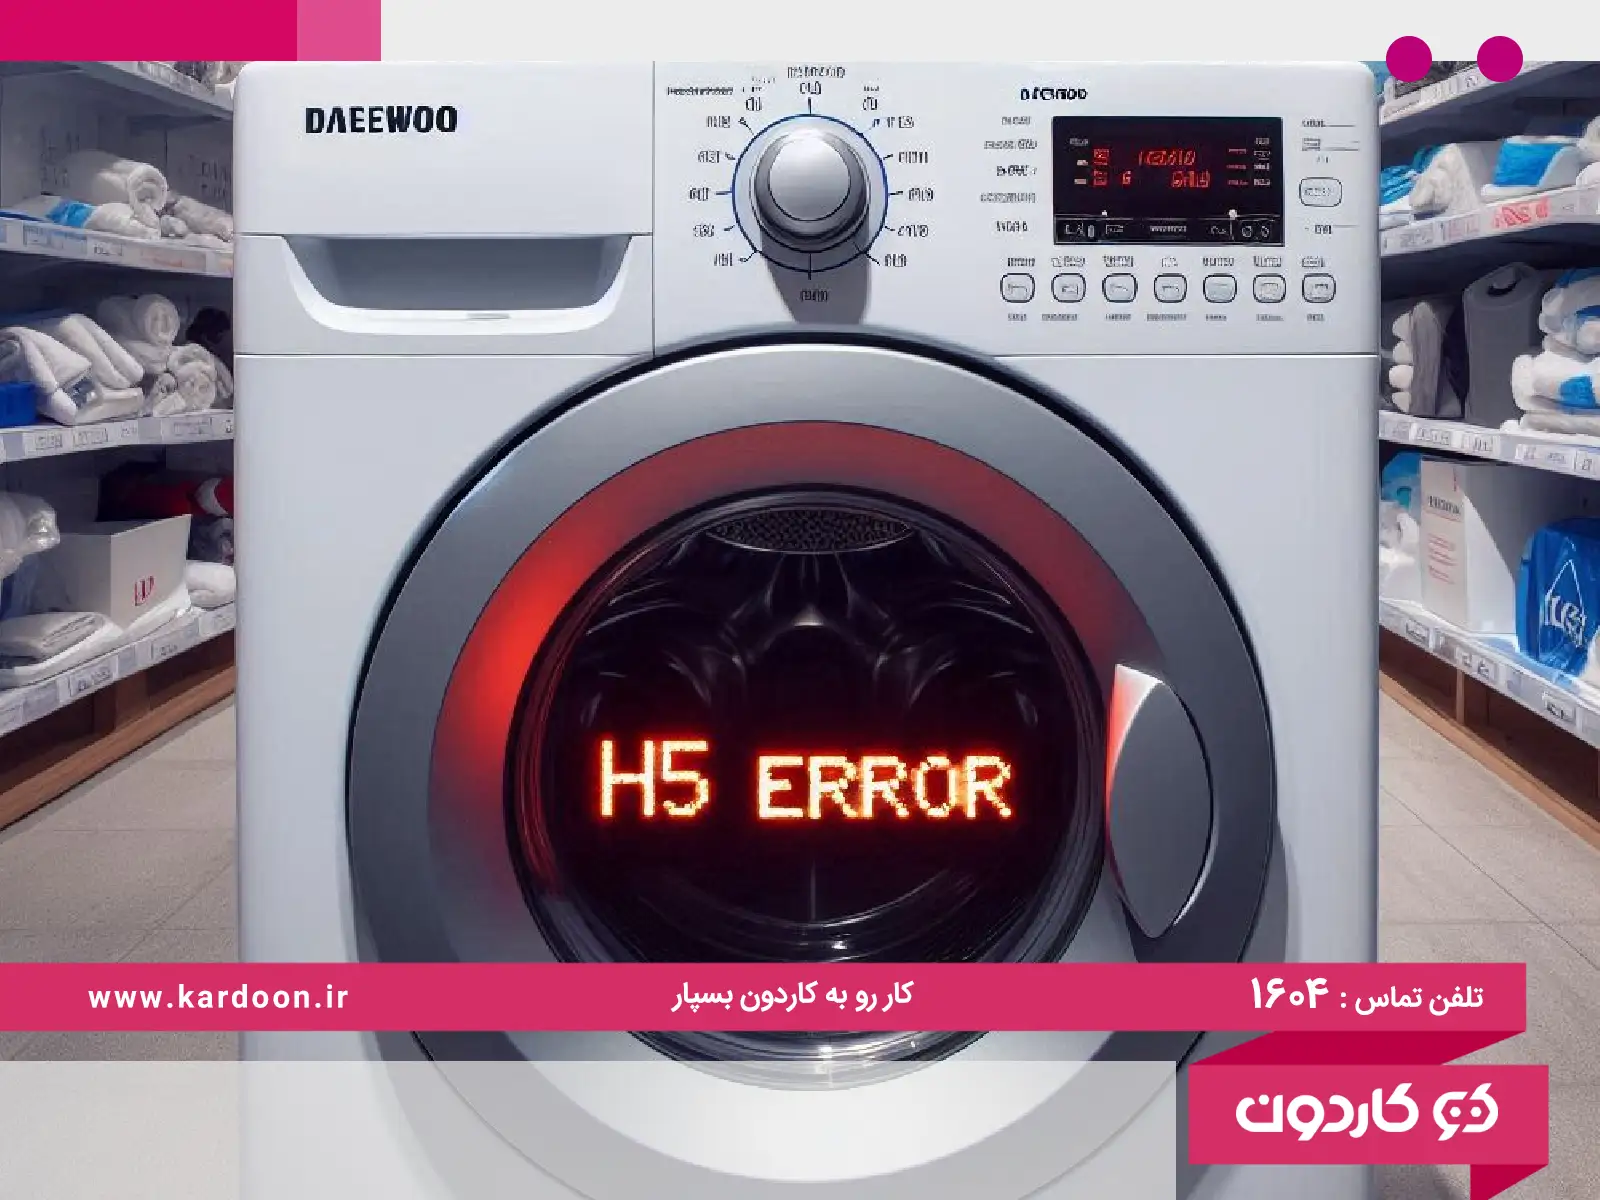 The reason for the h5 error of the Daewoo washing machine